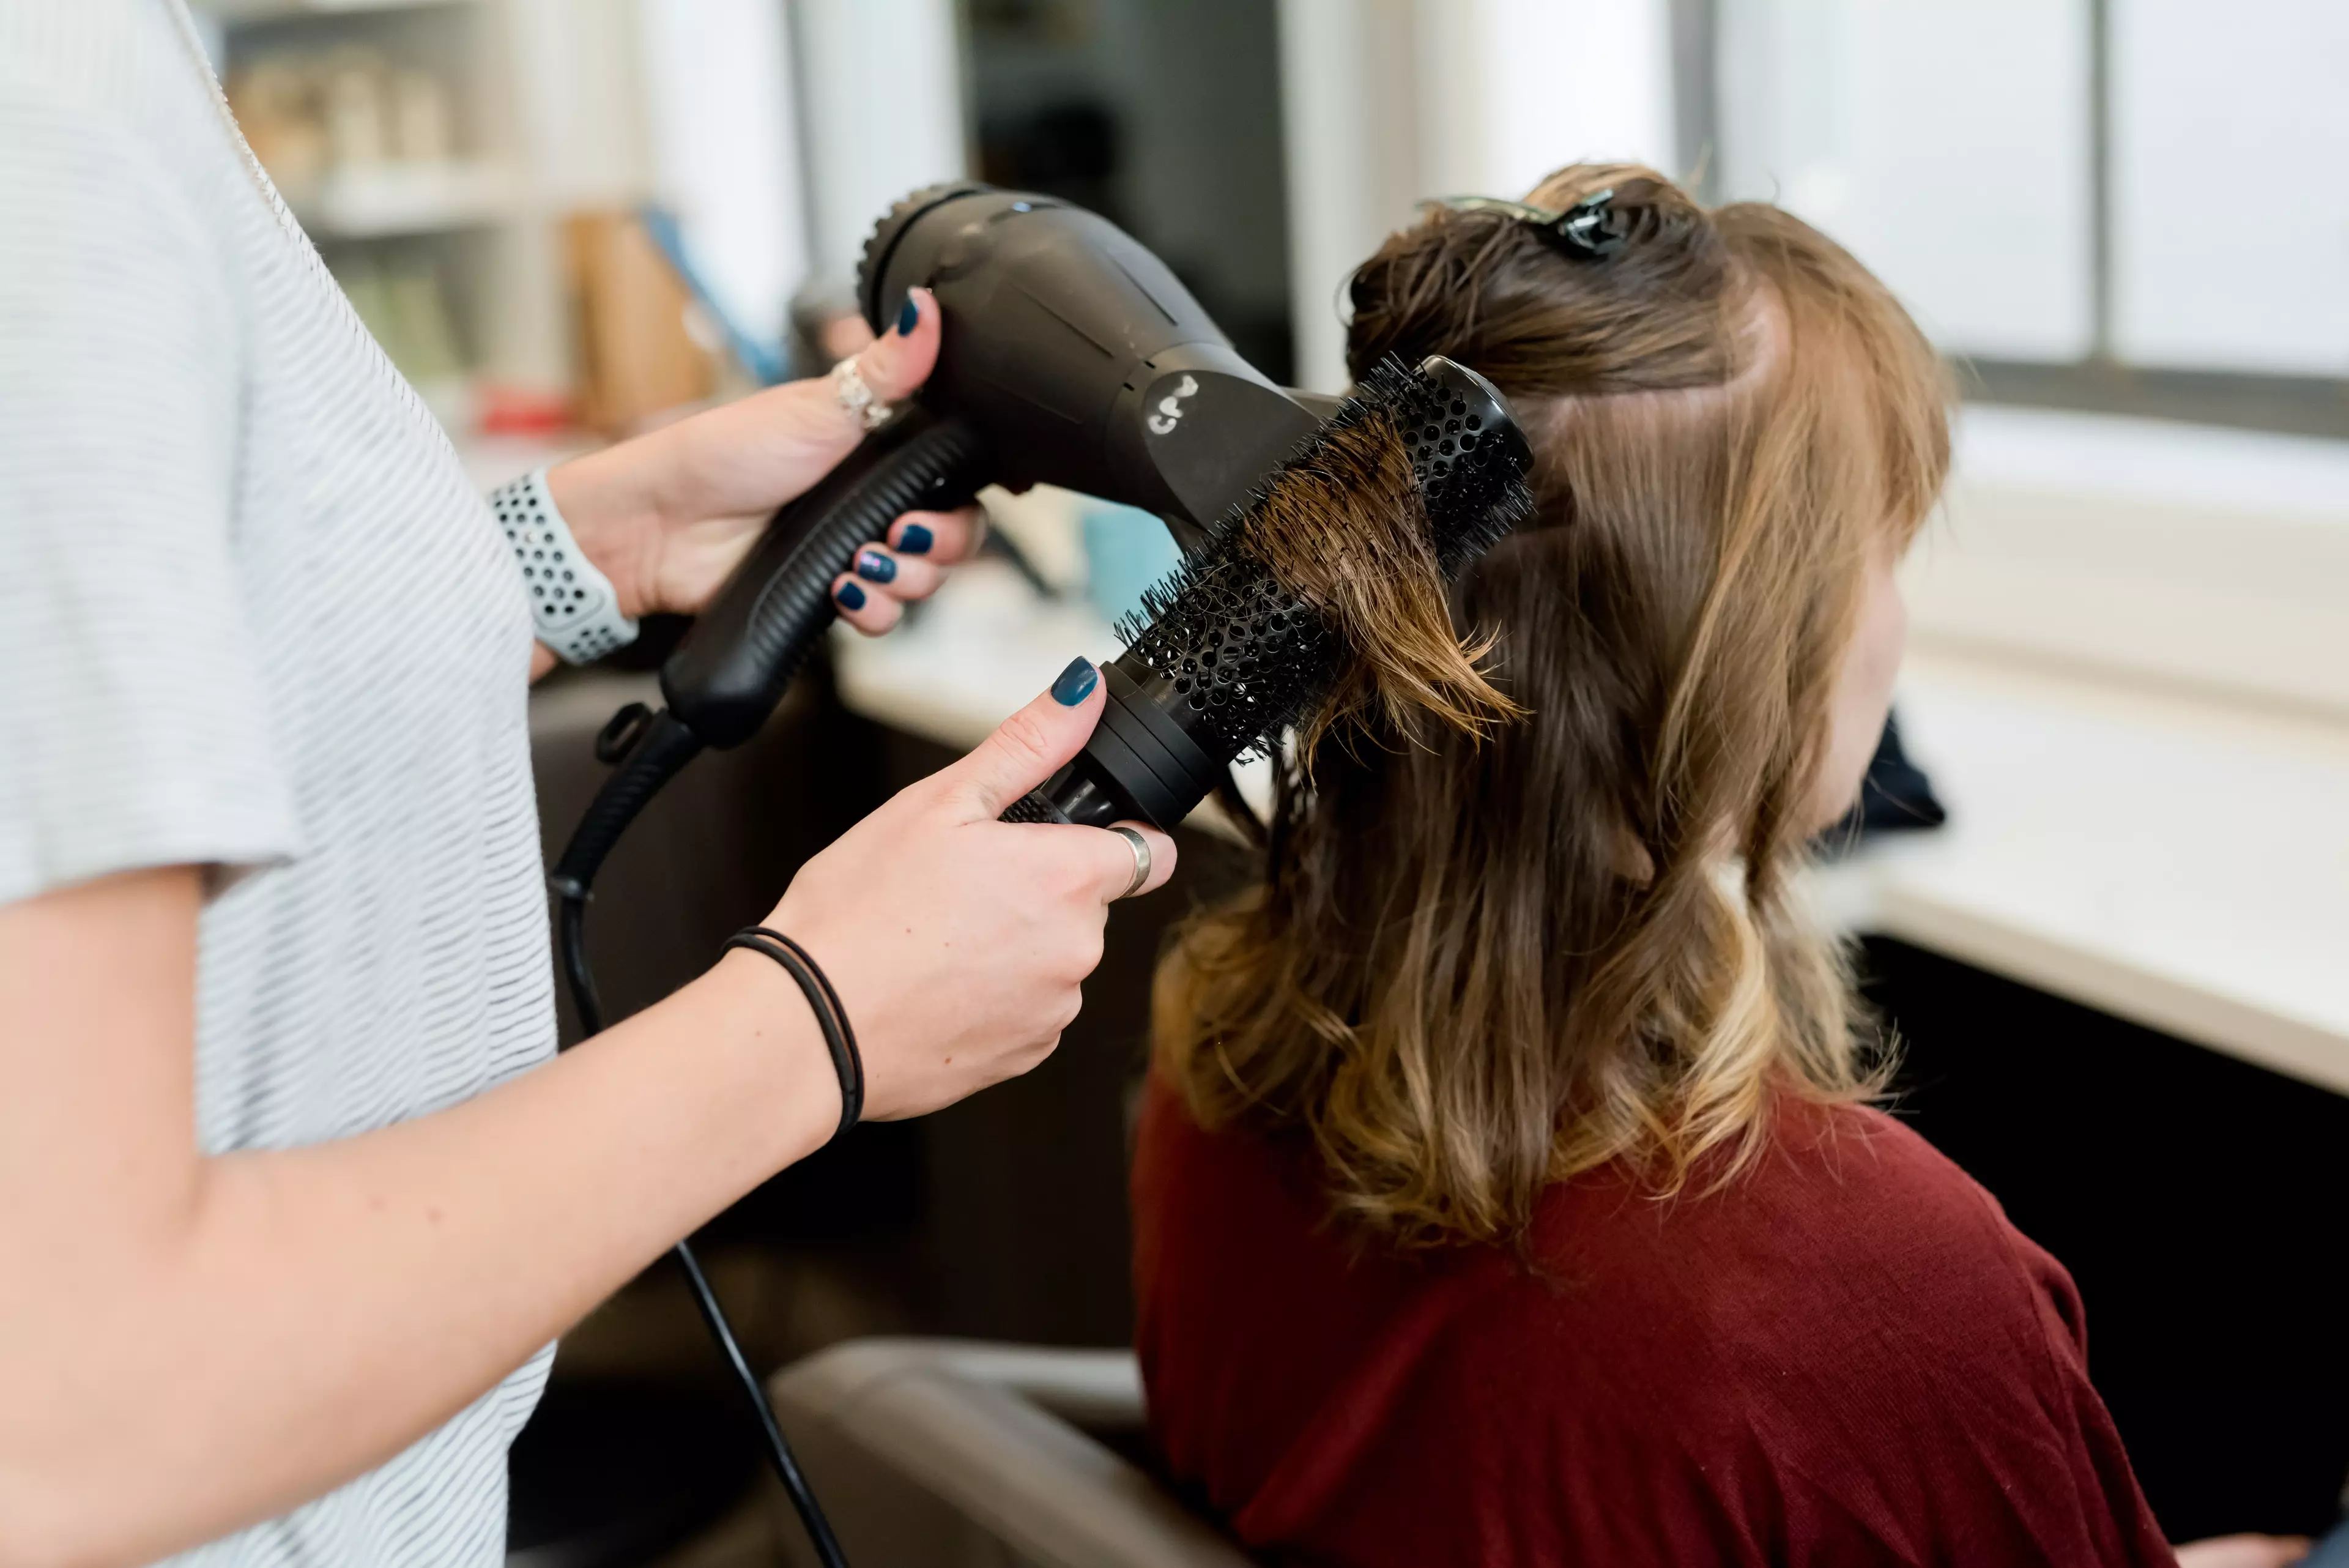 Could we see a rise in shorter styles to reduce appointment times as salons reopen? (